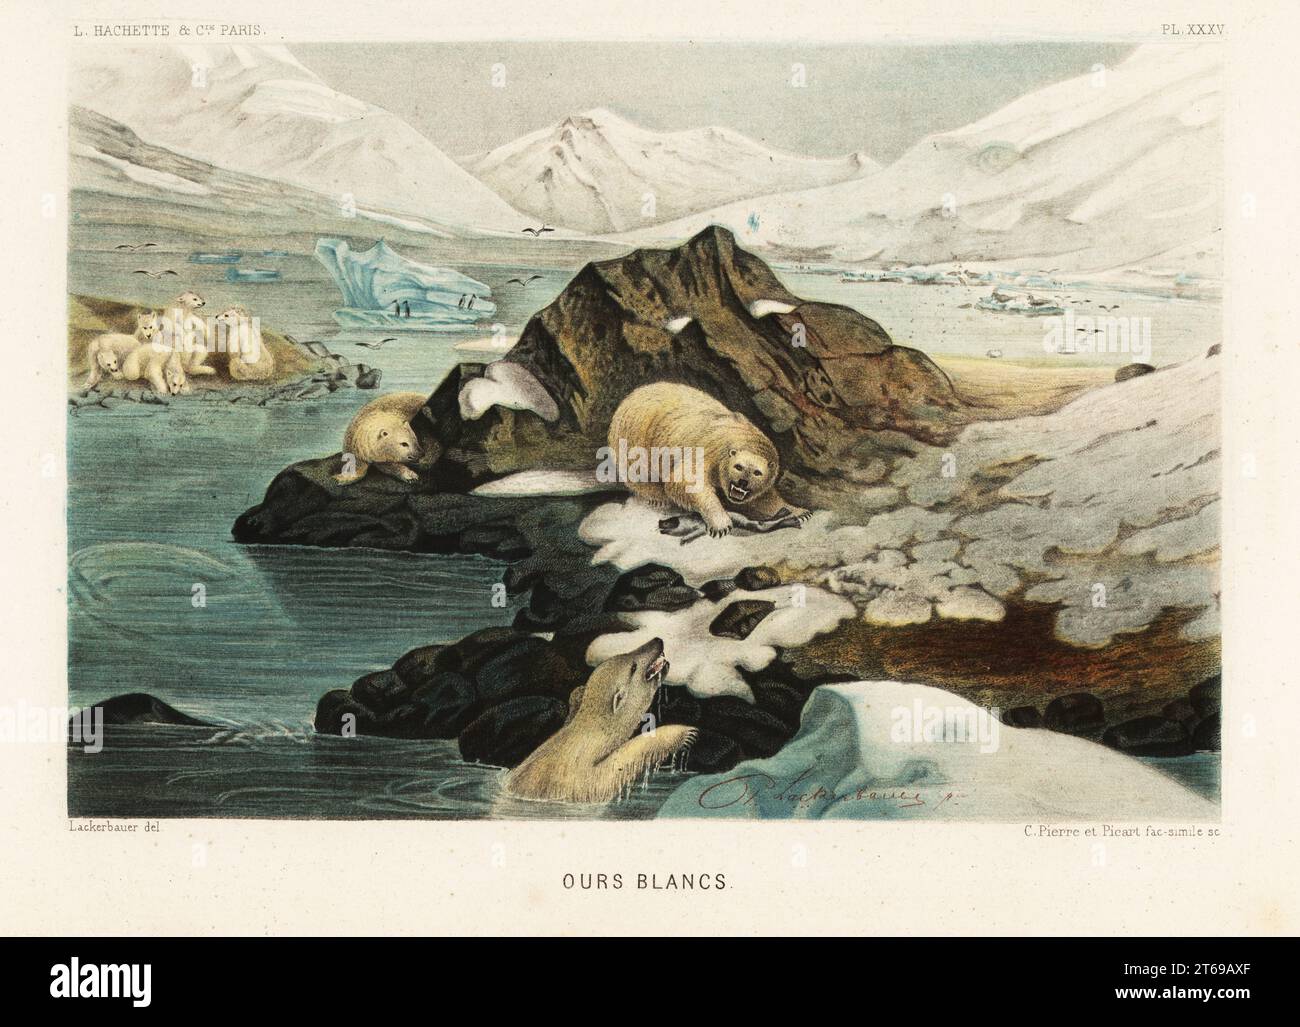 Polar bears, Ursus maritimus, hunting seals in an Arctic landscape. Ours blancs. Chromolithograph by C. Pierre and Bernard Picart after Pierre Lackerbauer from Alfred Fredols Le Monde de la Mer, the World of the Sea, edited by Olivier Fredol, Librairie Hachette et. Cie., Paris, 1881. Alfred Fredol was the pseudonym of French zoologist and botanist Alfred Moquin-Tandon, 1804-1863. Stock Photo